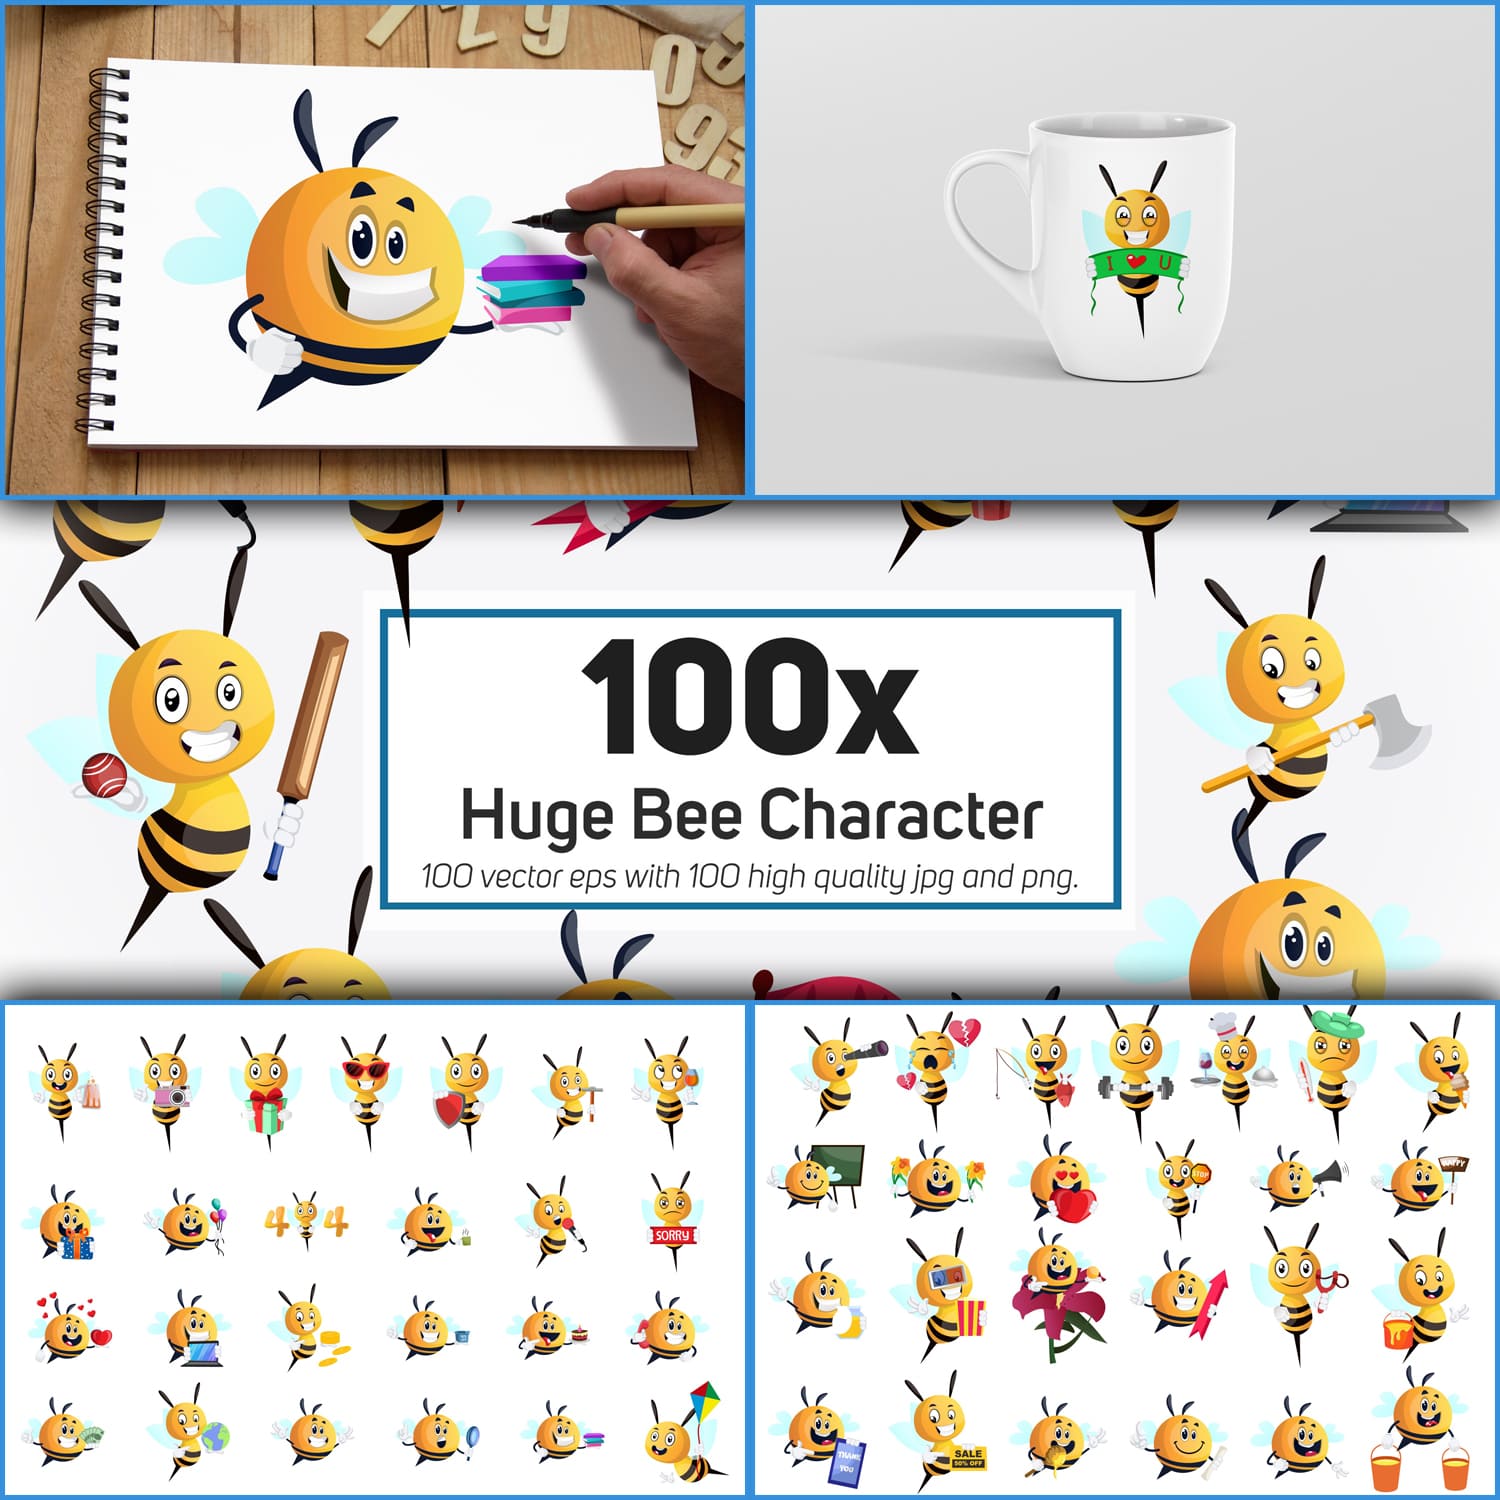 Preview huge bee character collection illustration.